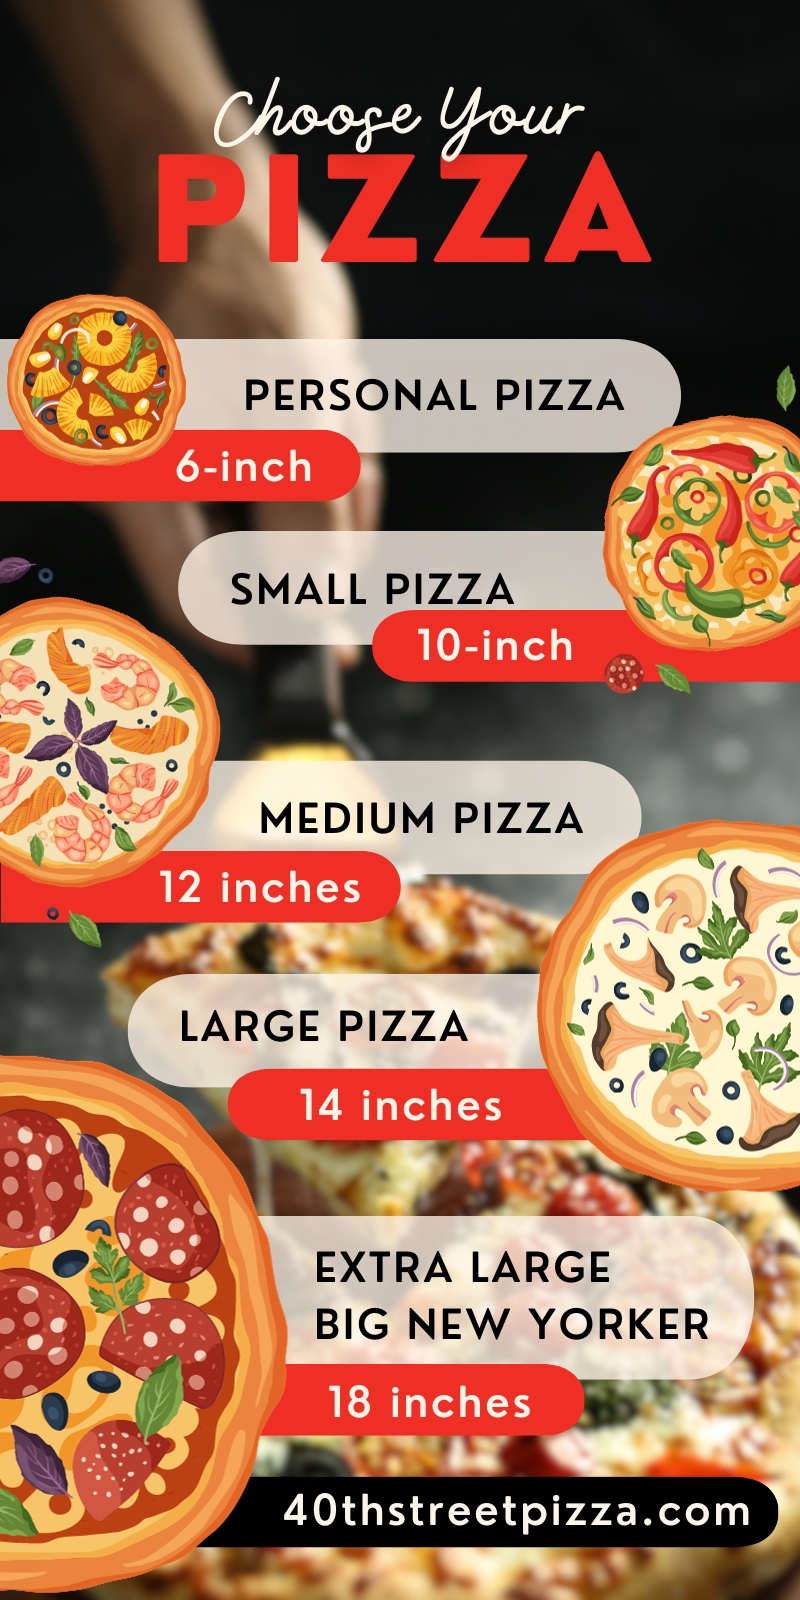 14 Inch Pizza: A Size for Sharing (or Not)